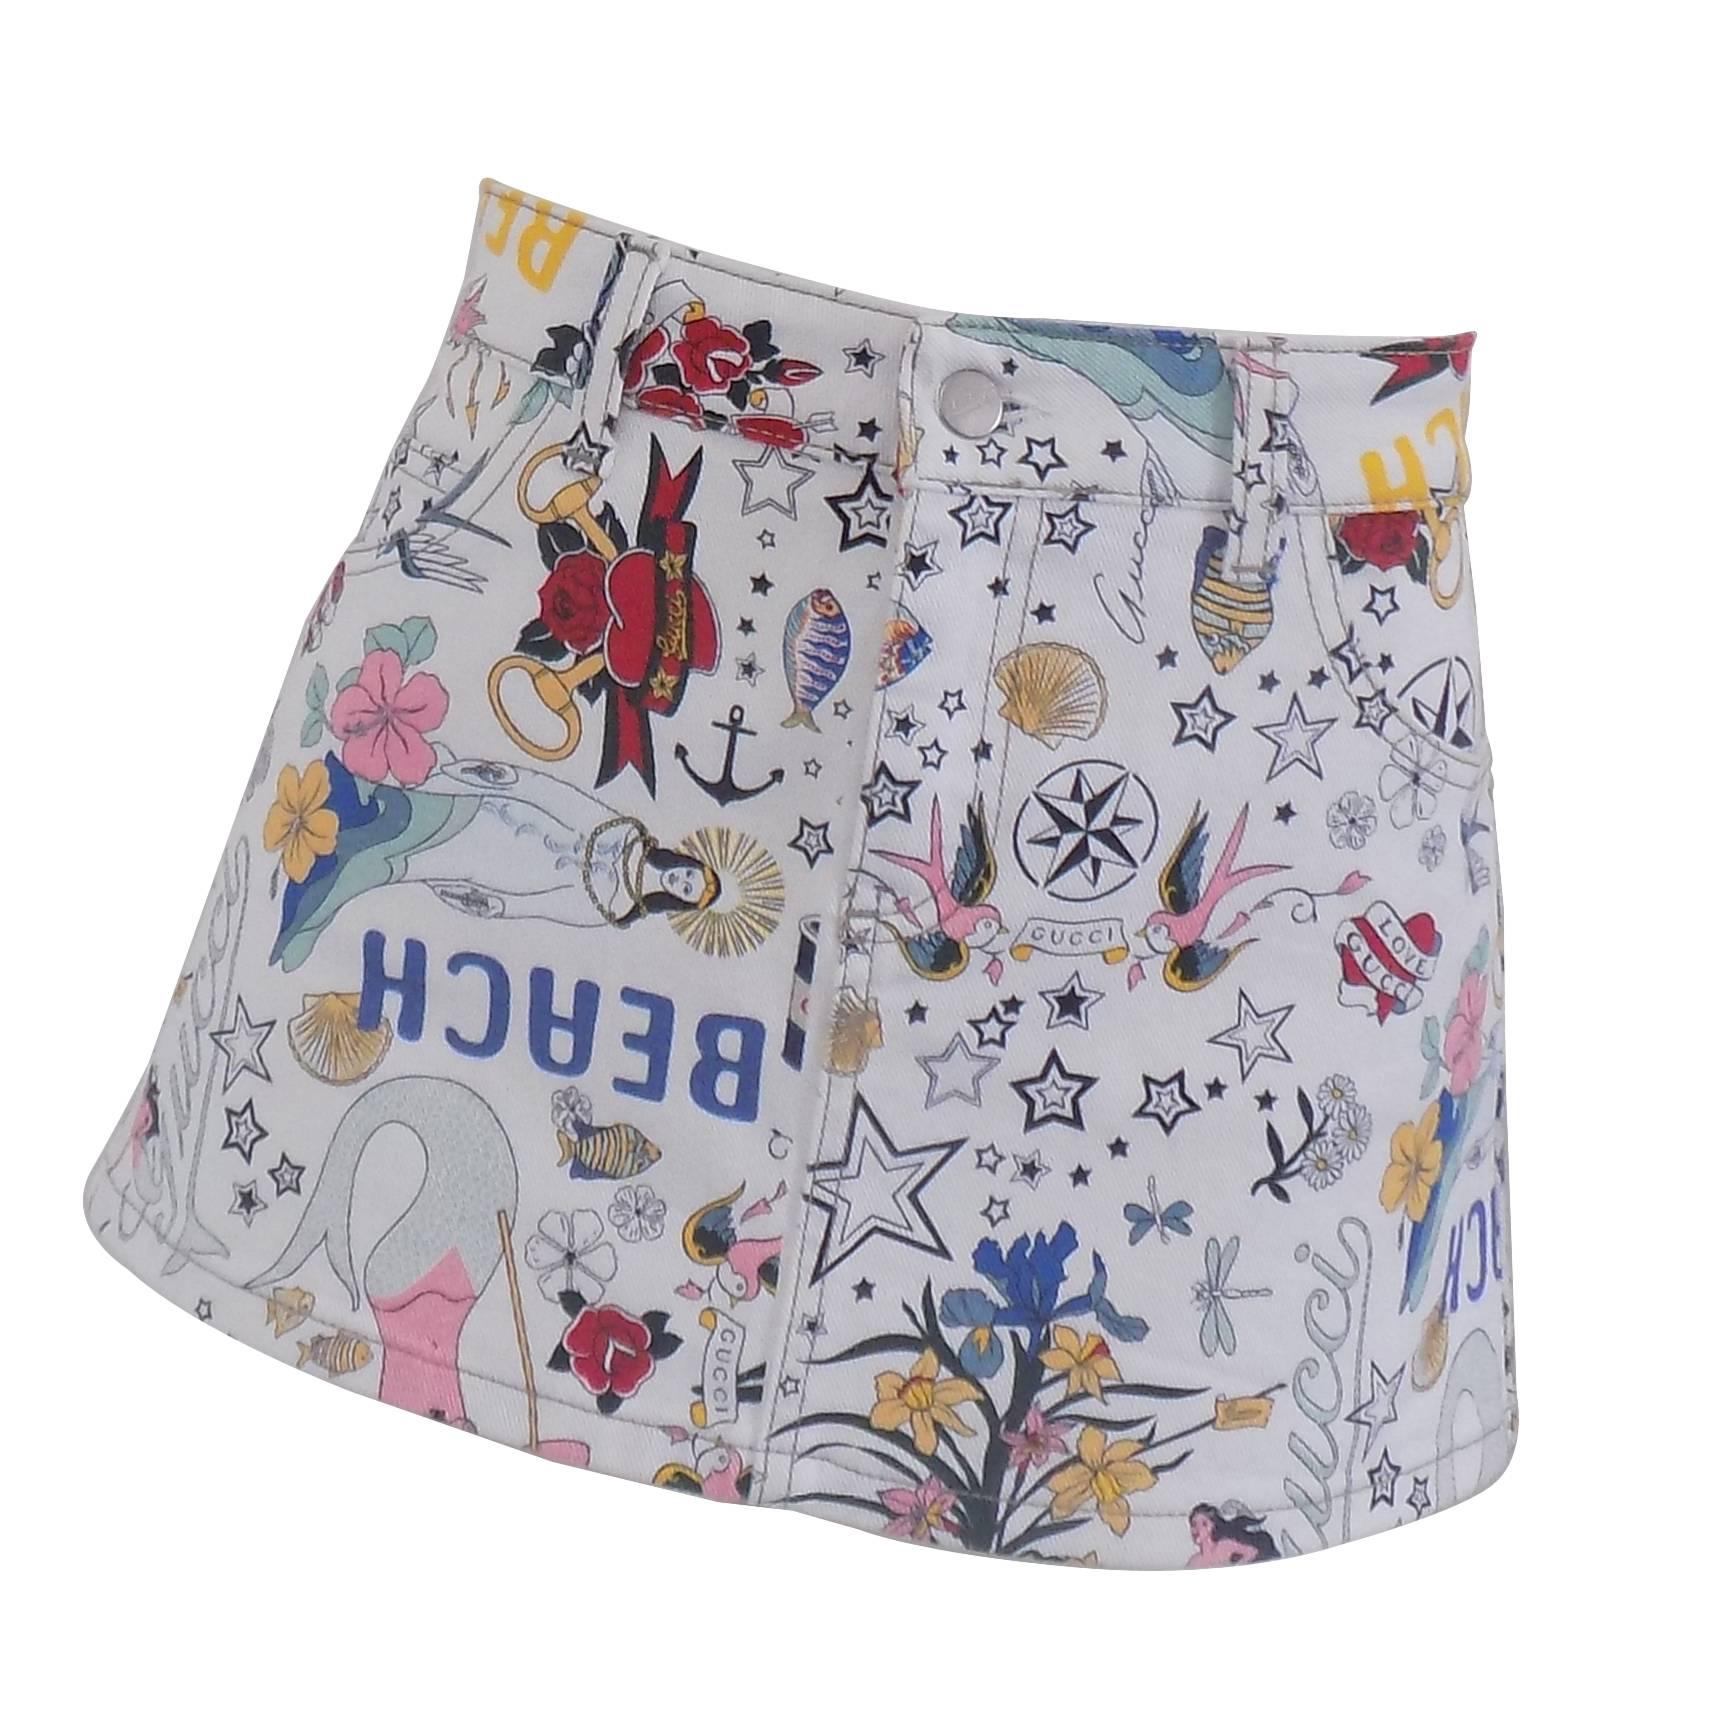 Gucci limited edition Skirt